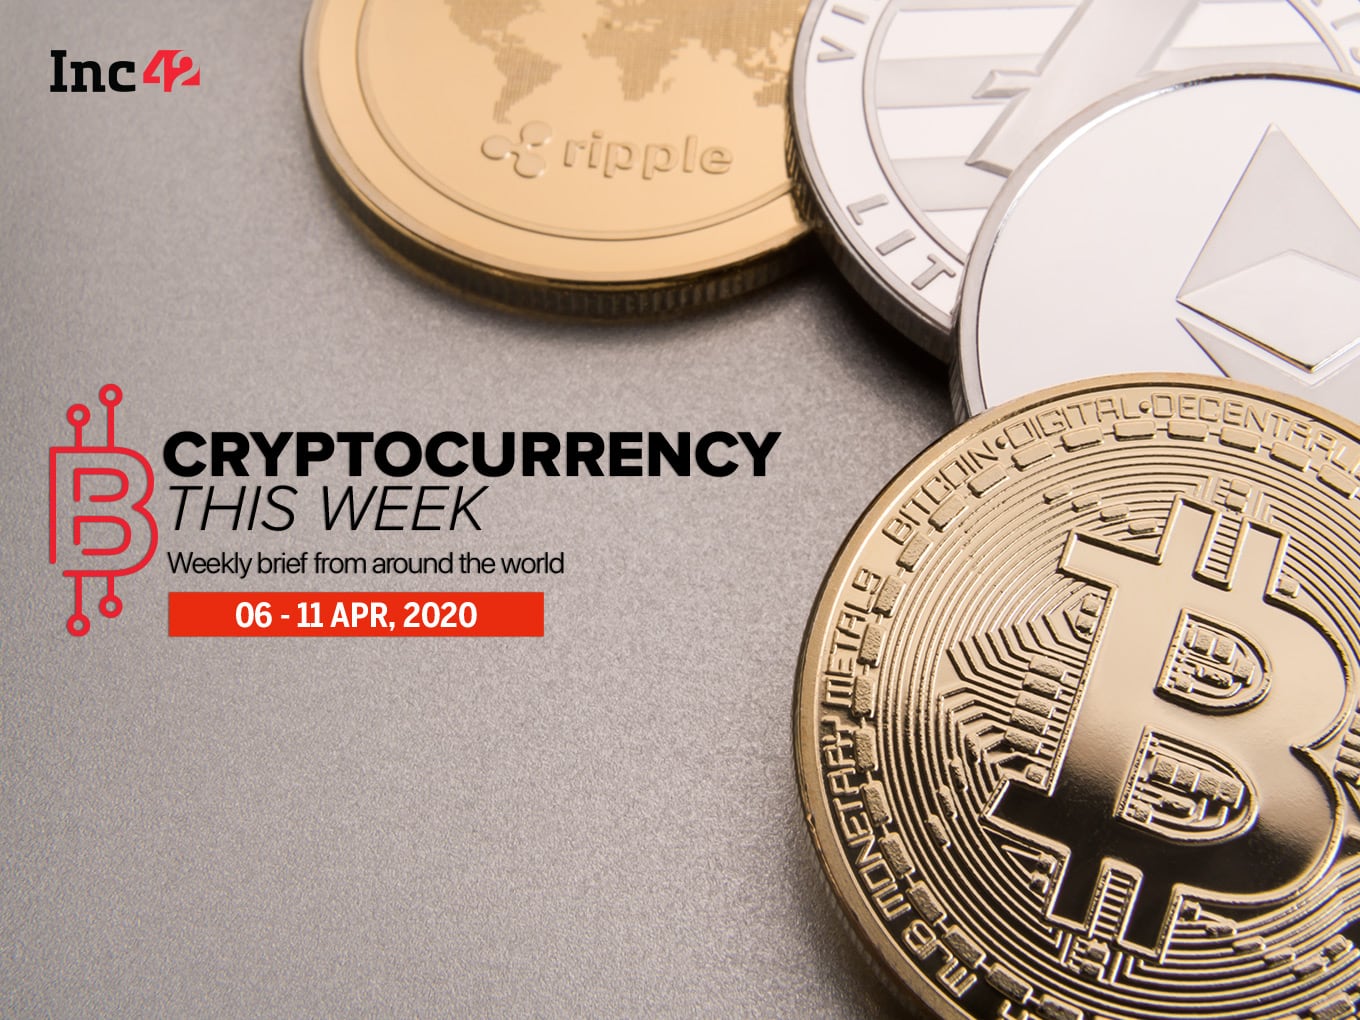 Cryptocurrency This Week: Bitcoin Fundraising Campaign Against Covid-19, Bitcoin Cash Halving And More